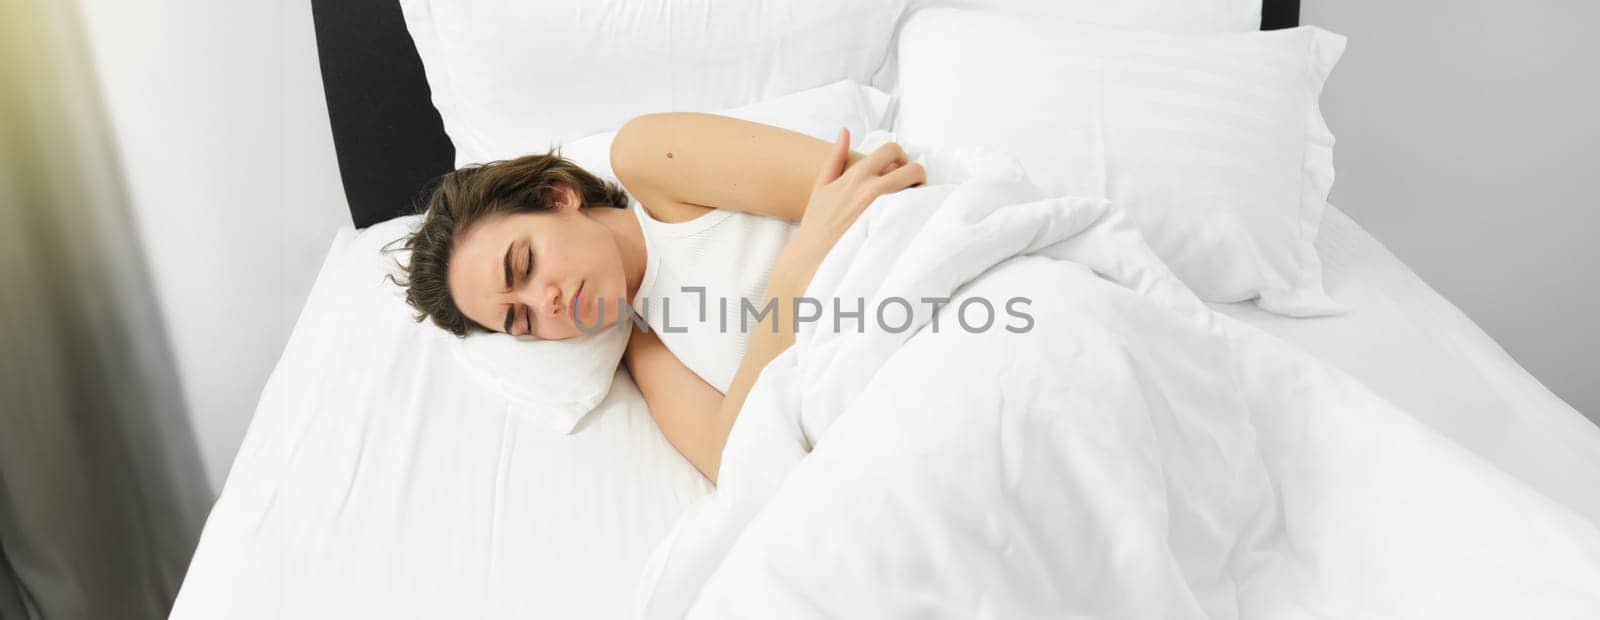 Portrait of woman lying in bed with stomach ache, has menstrual cramps, frowning and feeling pain period. Wellbeing and health concept